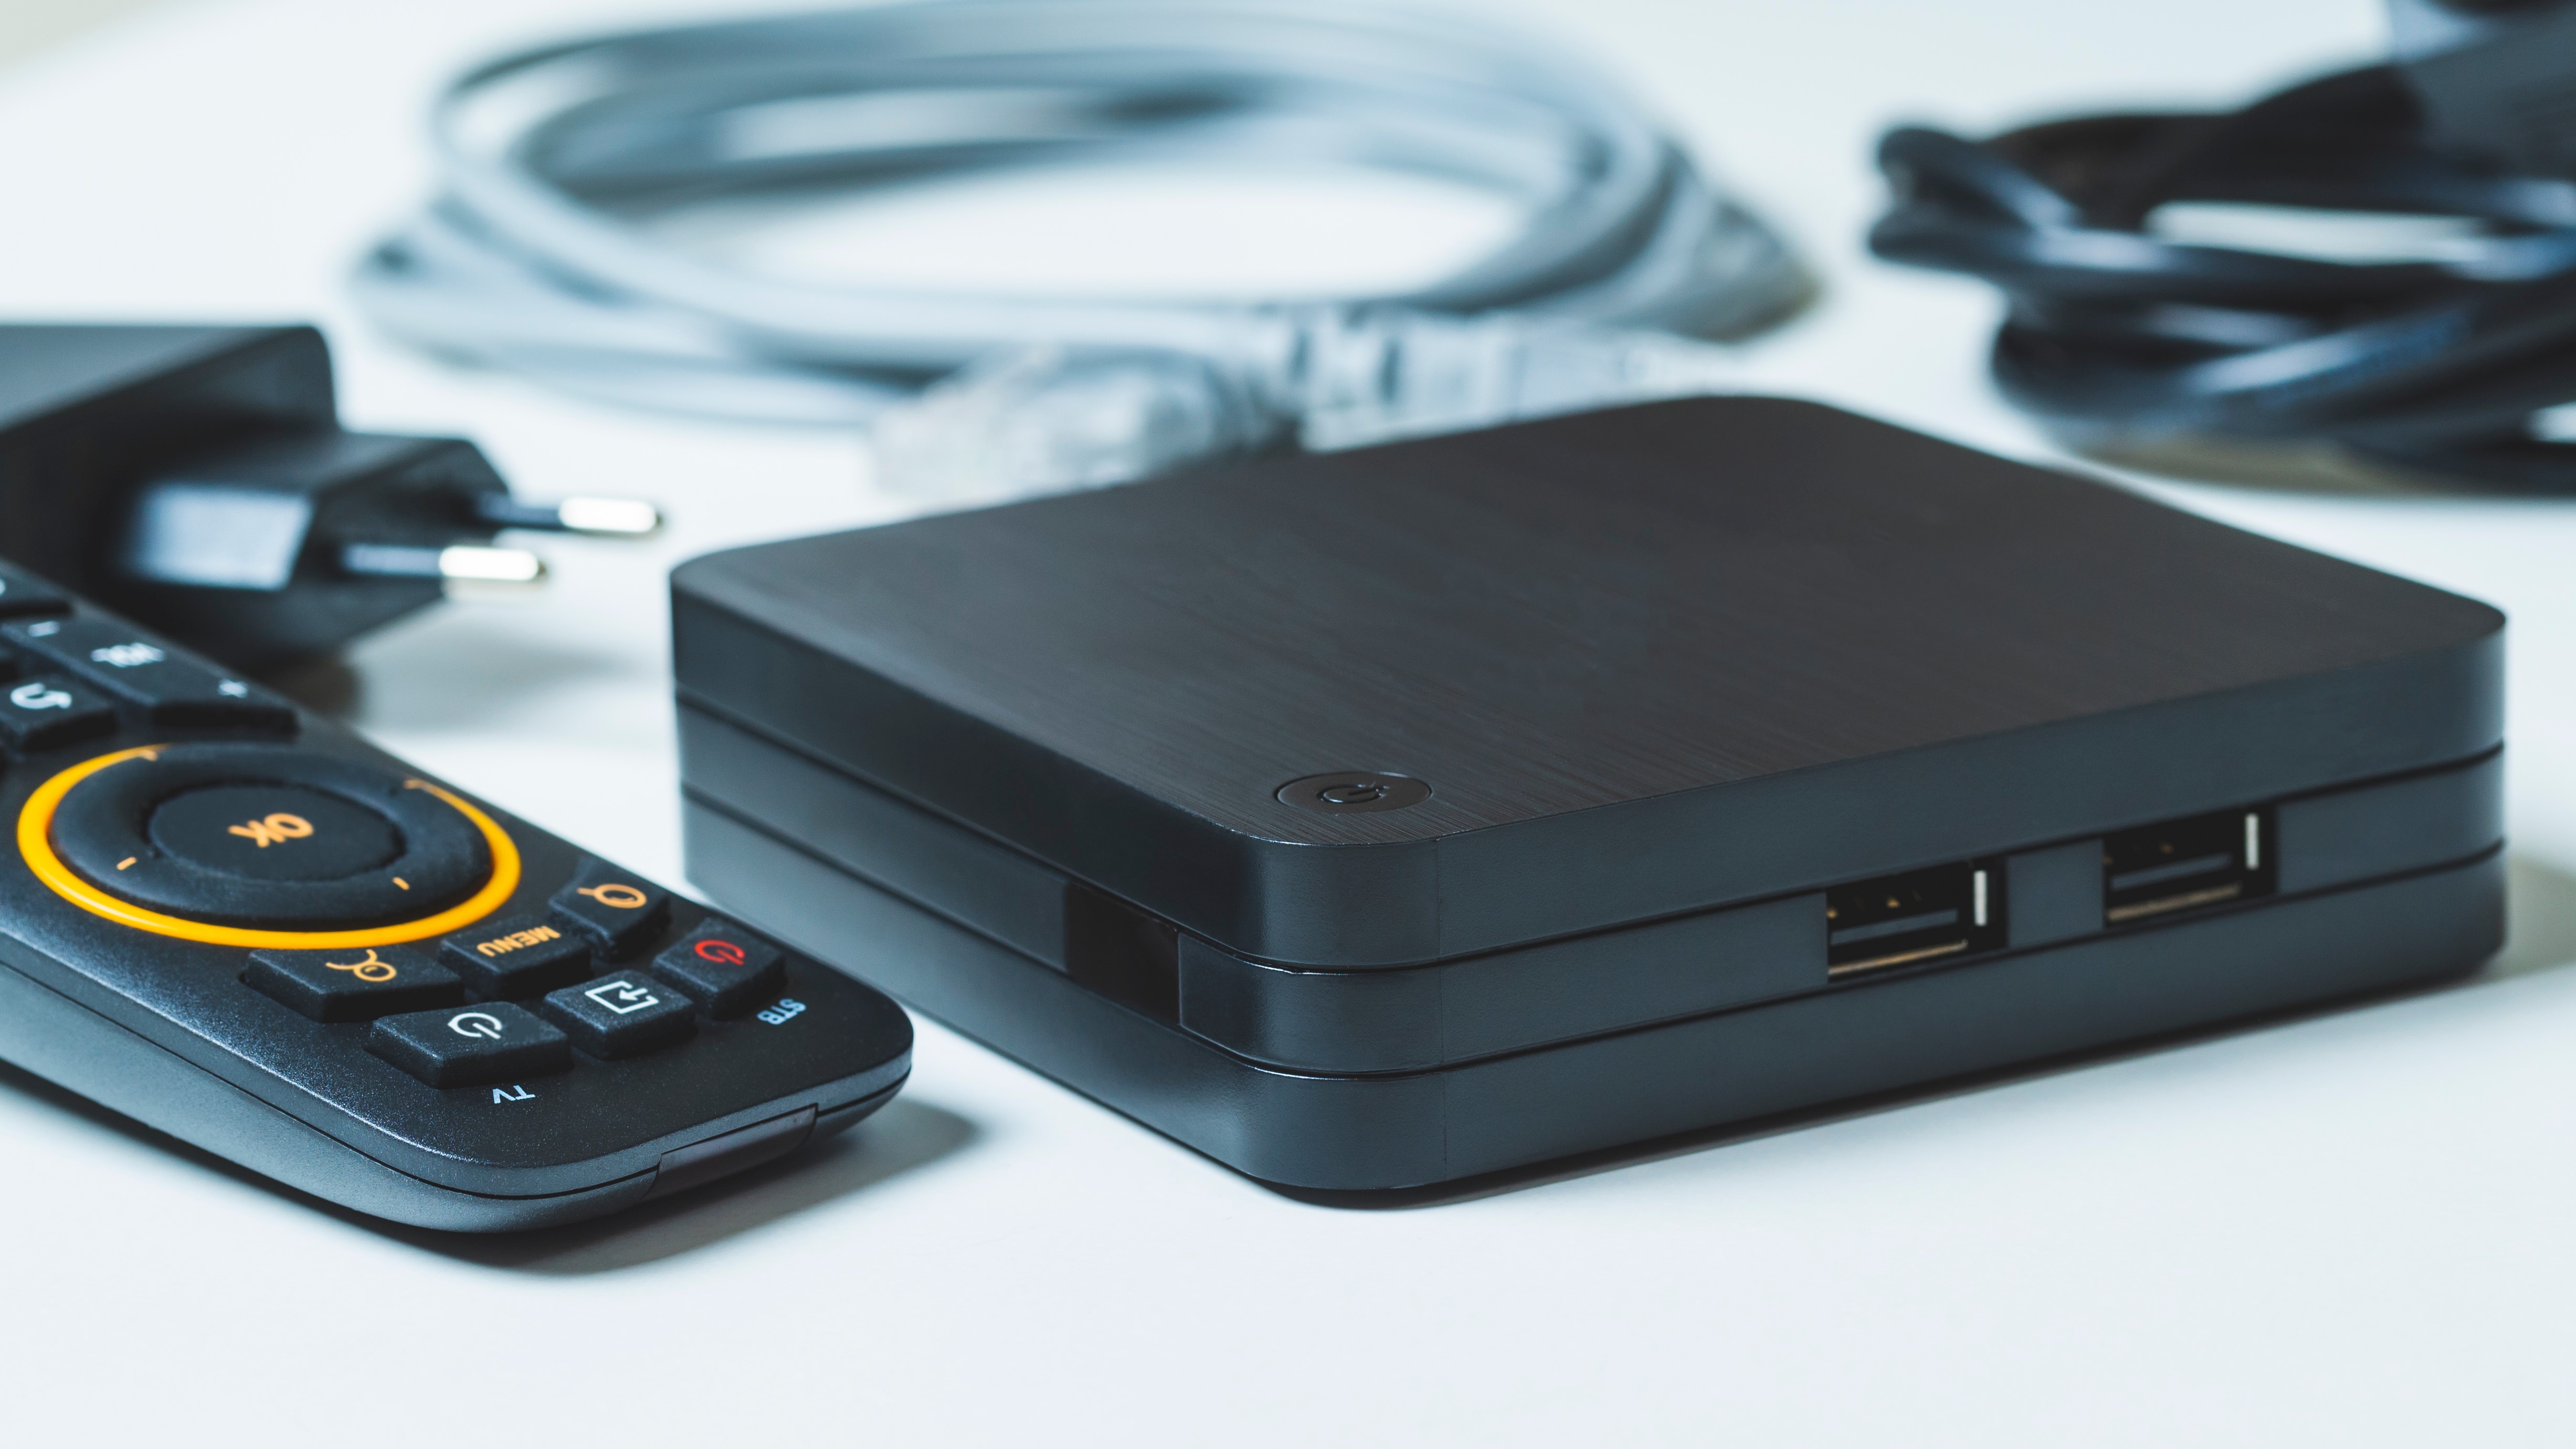 Millions of cheap Android TV boxes come pre-infected with botnet malware